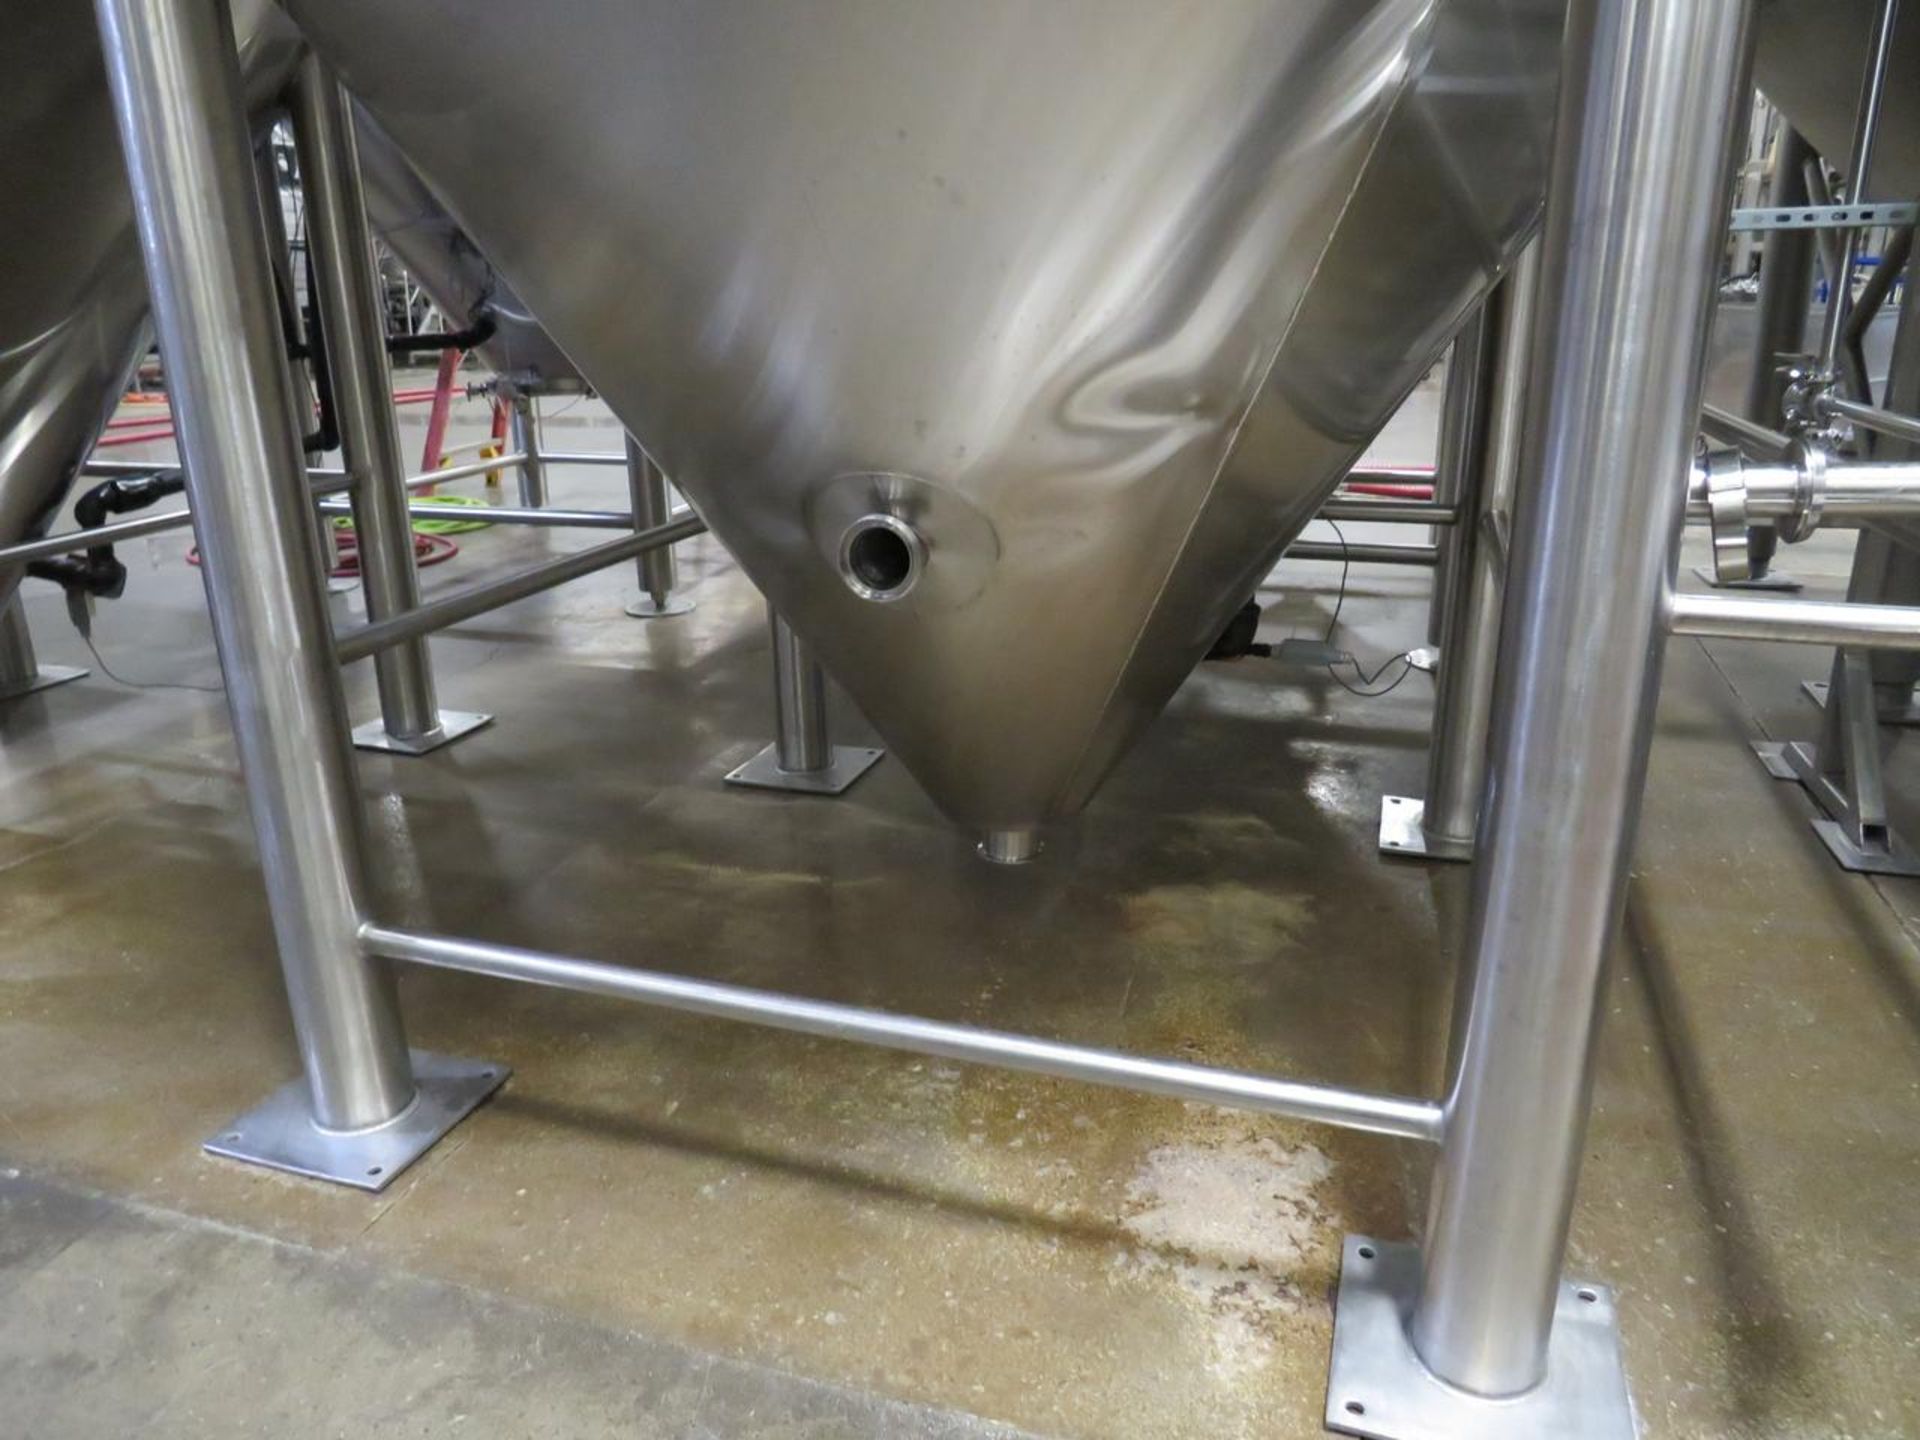 2012 Craftwerk 100-BBL Capacity Stainless Steel Fermentaion Tank - Image 3 of 8